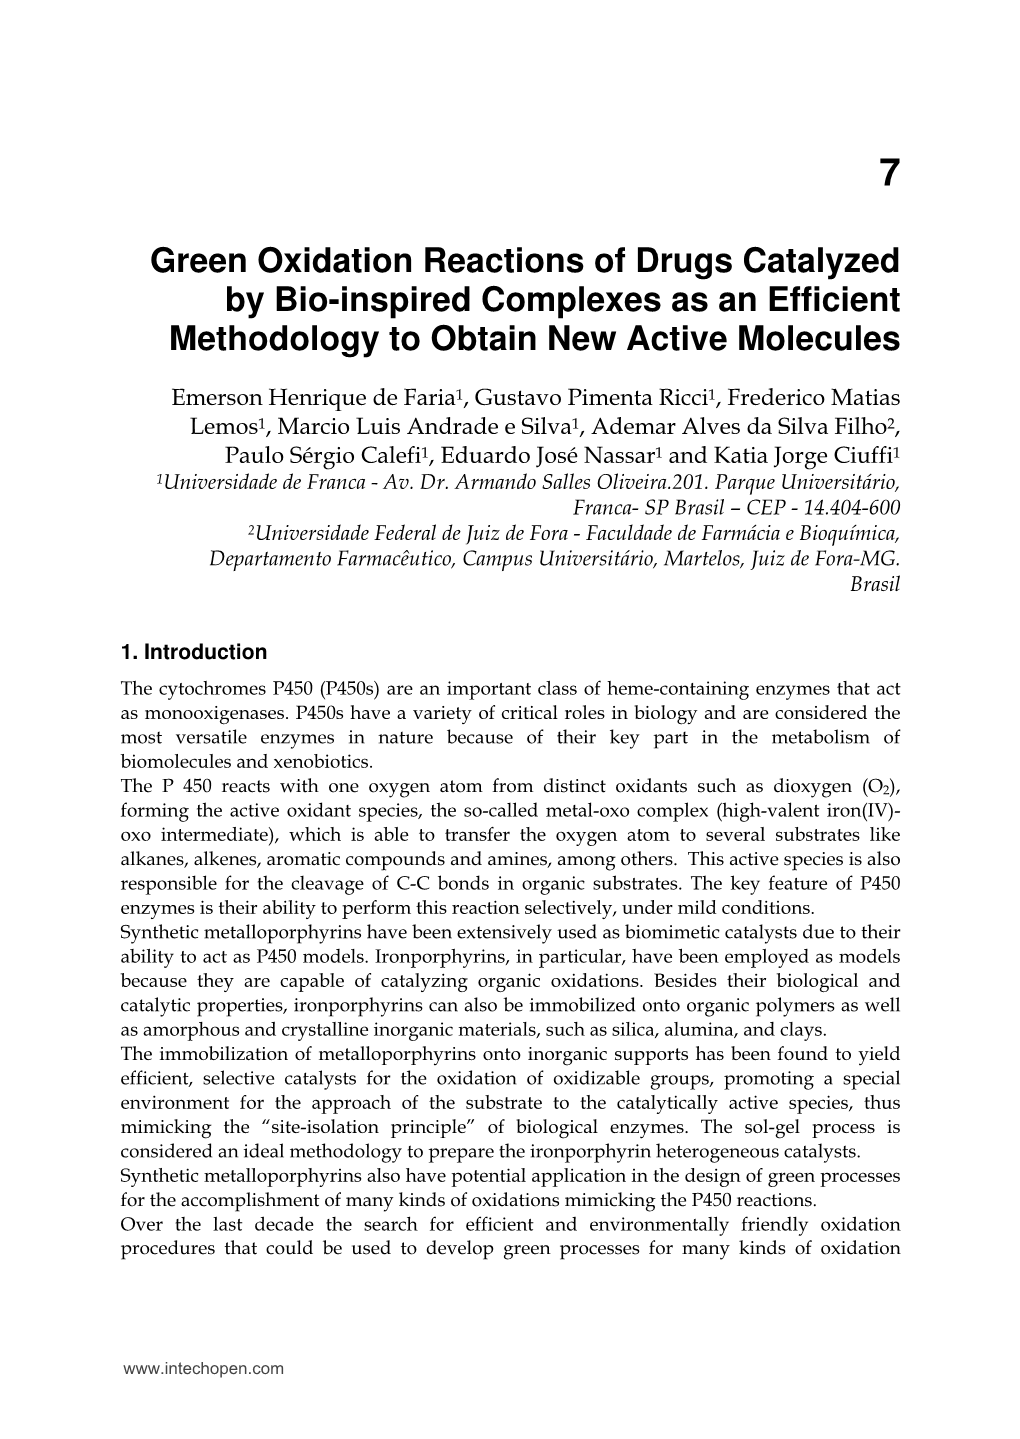 Green Oxidation Reactions of Drugs Catalyzed by Bio-Inspired Complexes As an Efficient Methodology to Obtain New Active Molecules